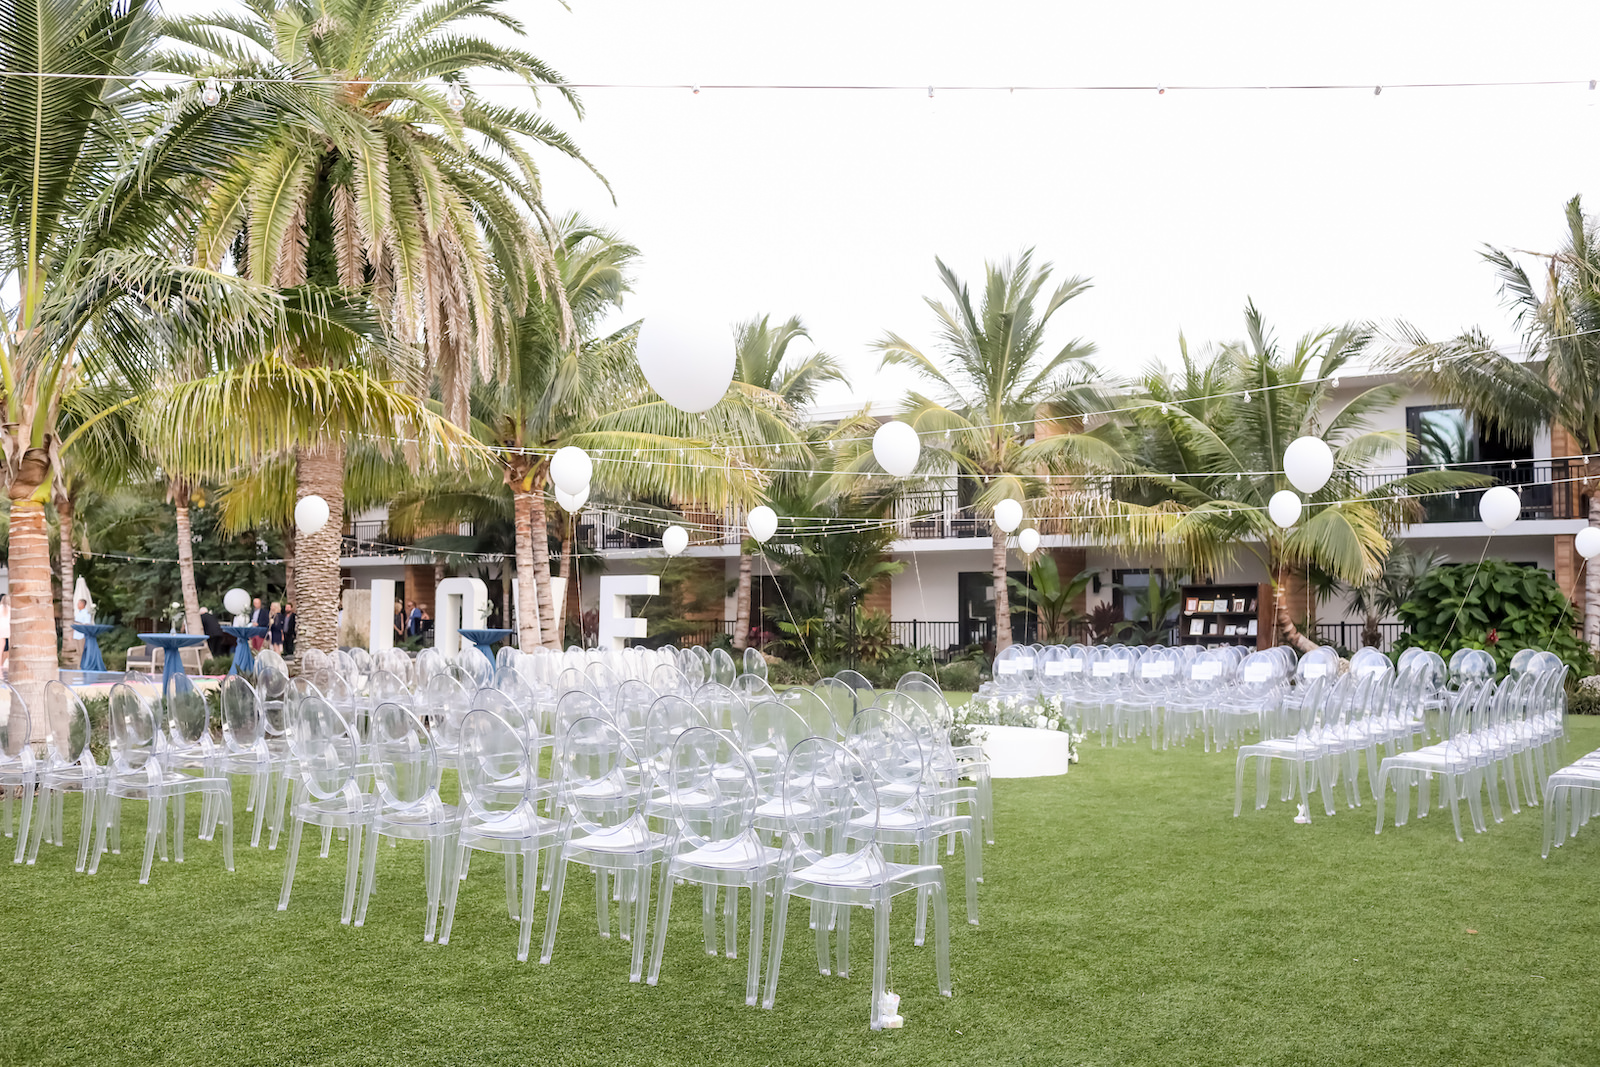 Romantic, Modern Outdoor Florida Wedding Ceremony at Bali Hai Beachfront Resort Anna Marie Island, Acrylic Ghost Chair Rentals with White Balloons and LOVE Lettering | Sarasota Wedding Planner Kelly Kennedy Weddings | Tampa Bay Wedding Photographer Lifelong Photography Studio